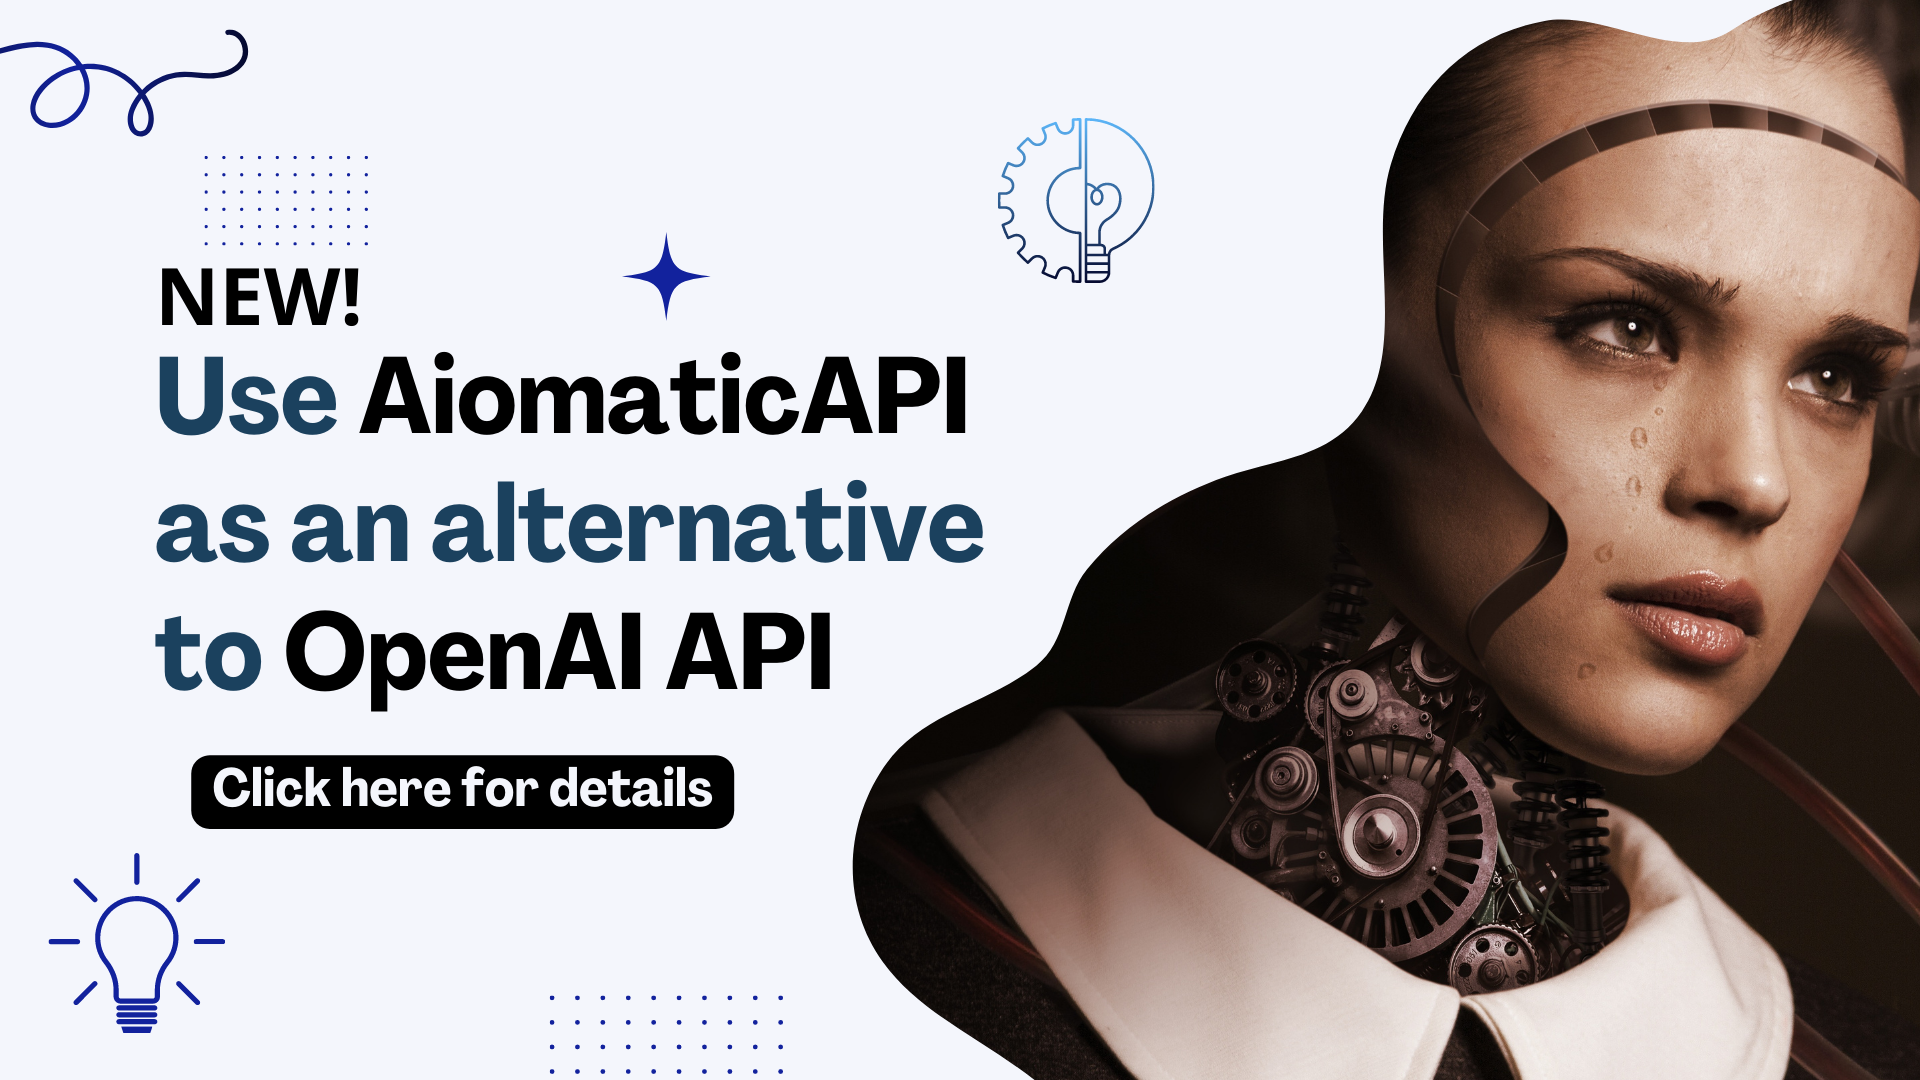 aiomaticapi launched